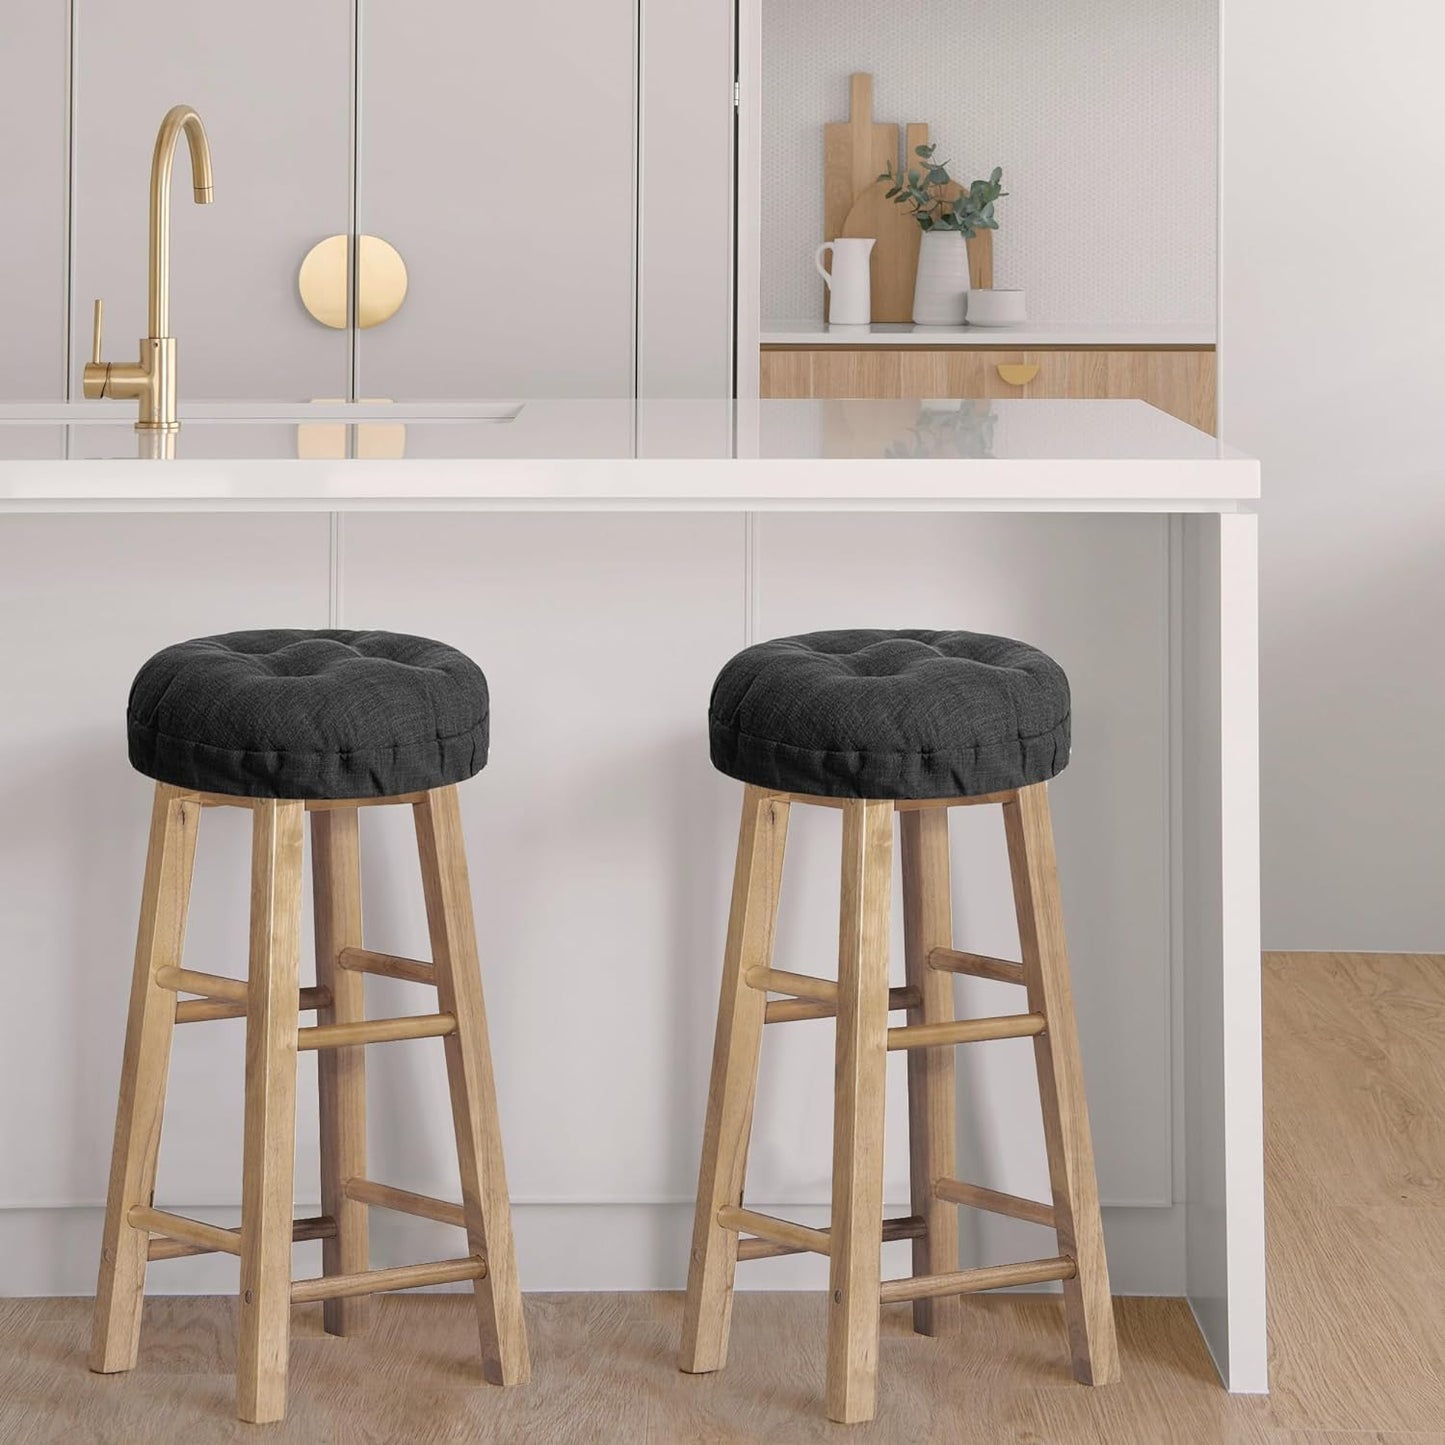 Sunlit Bar Stool Covers - Set of 2 Round Bar Stool Seat Covers, Soft and Cushioned Bar Chair Covers, Easy to Install and Wash, Cover Only, 14 Inch Diameter, Gray